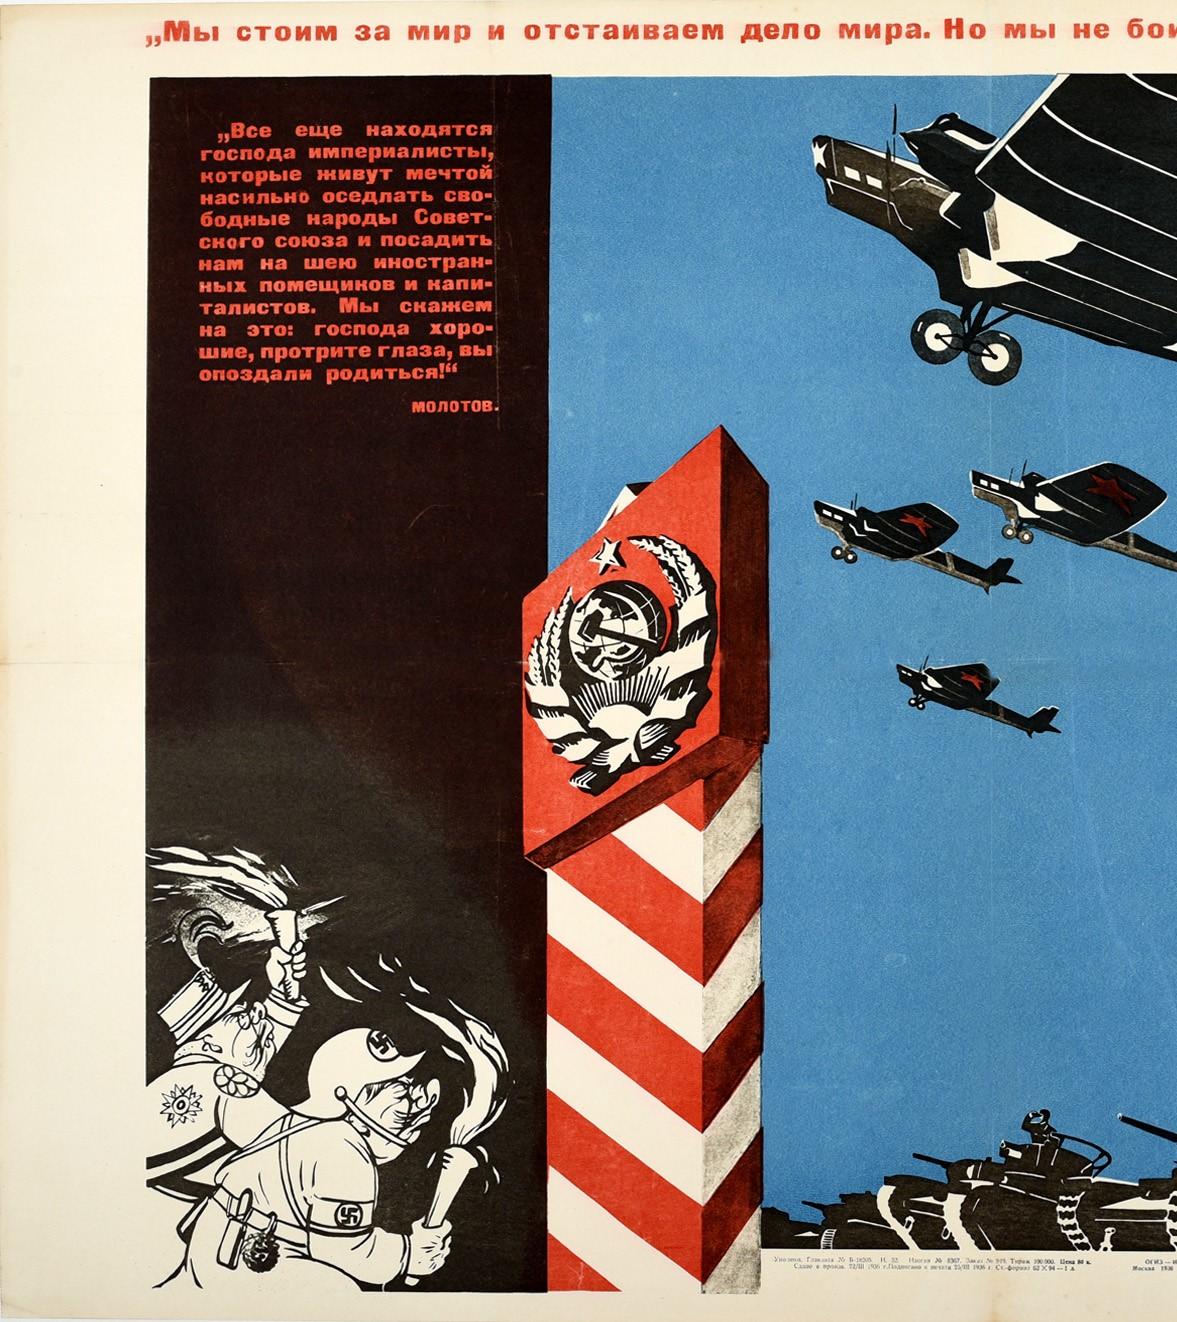 Original vintage Soviet propaganda poster - We Stand For Peace - featuring a great design depicting a squadron of military planes with red stars on the wings flying in the blue sky above a line of tanks pointing towards German Nazi caricatures